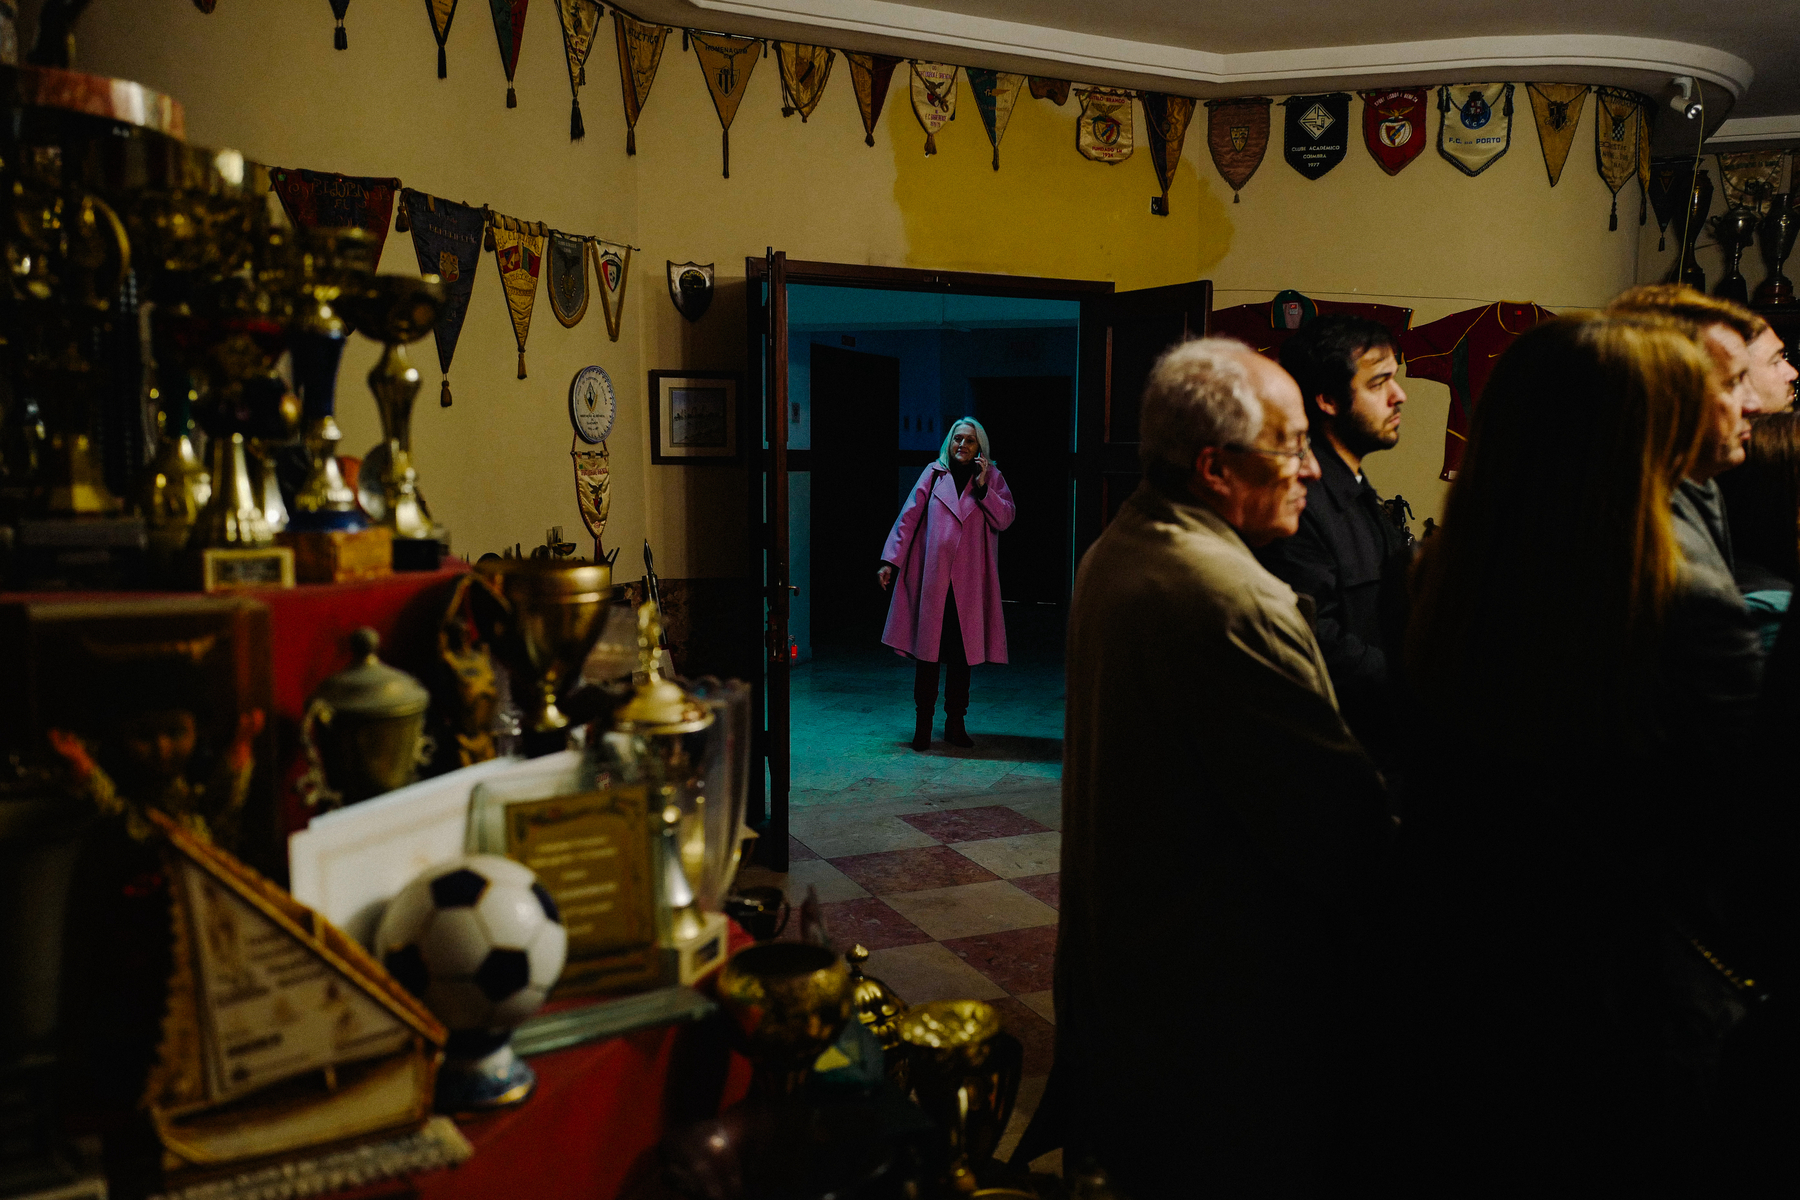 A trophy room filled with various awards and pennants with people gathered. In the doorway stands a person in a pink coat.